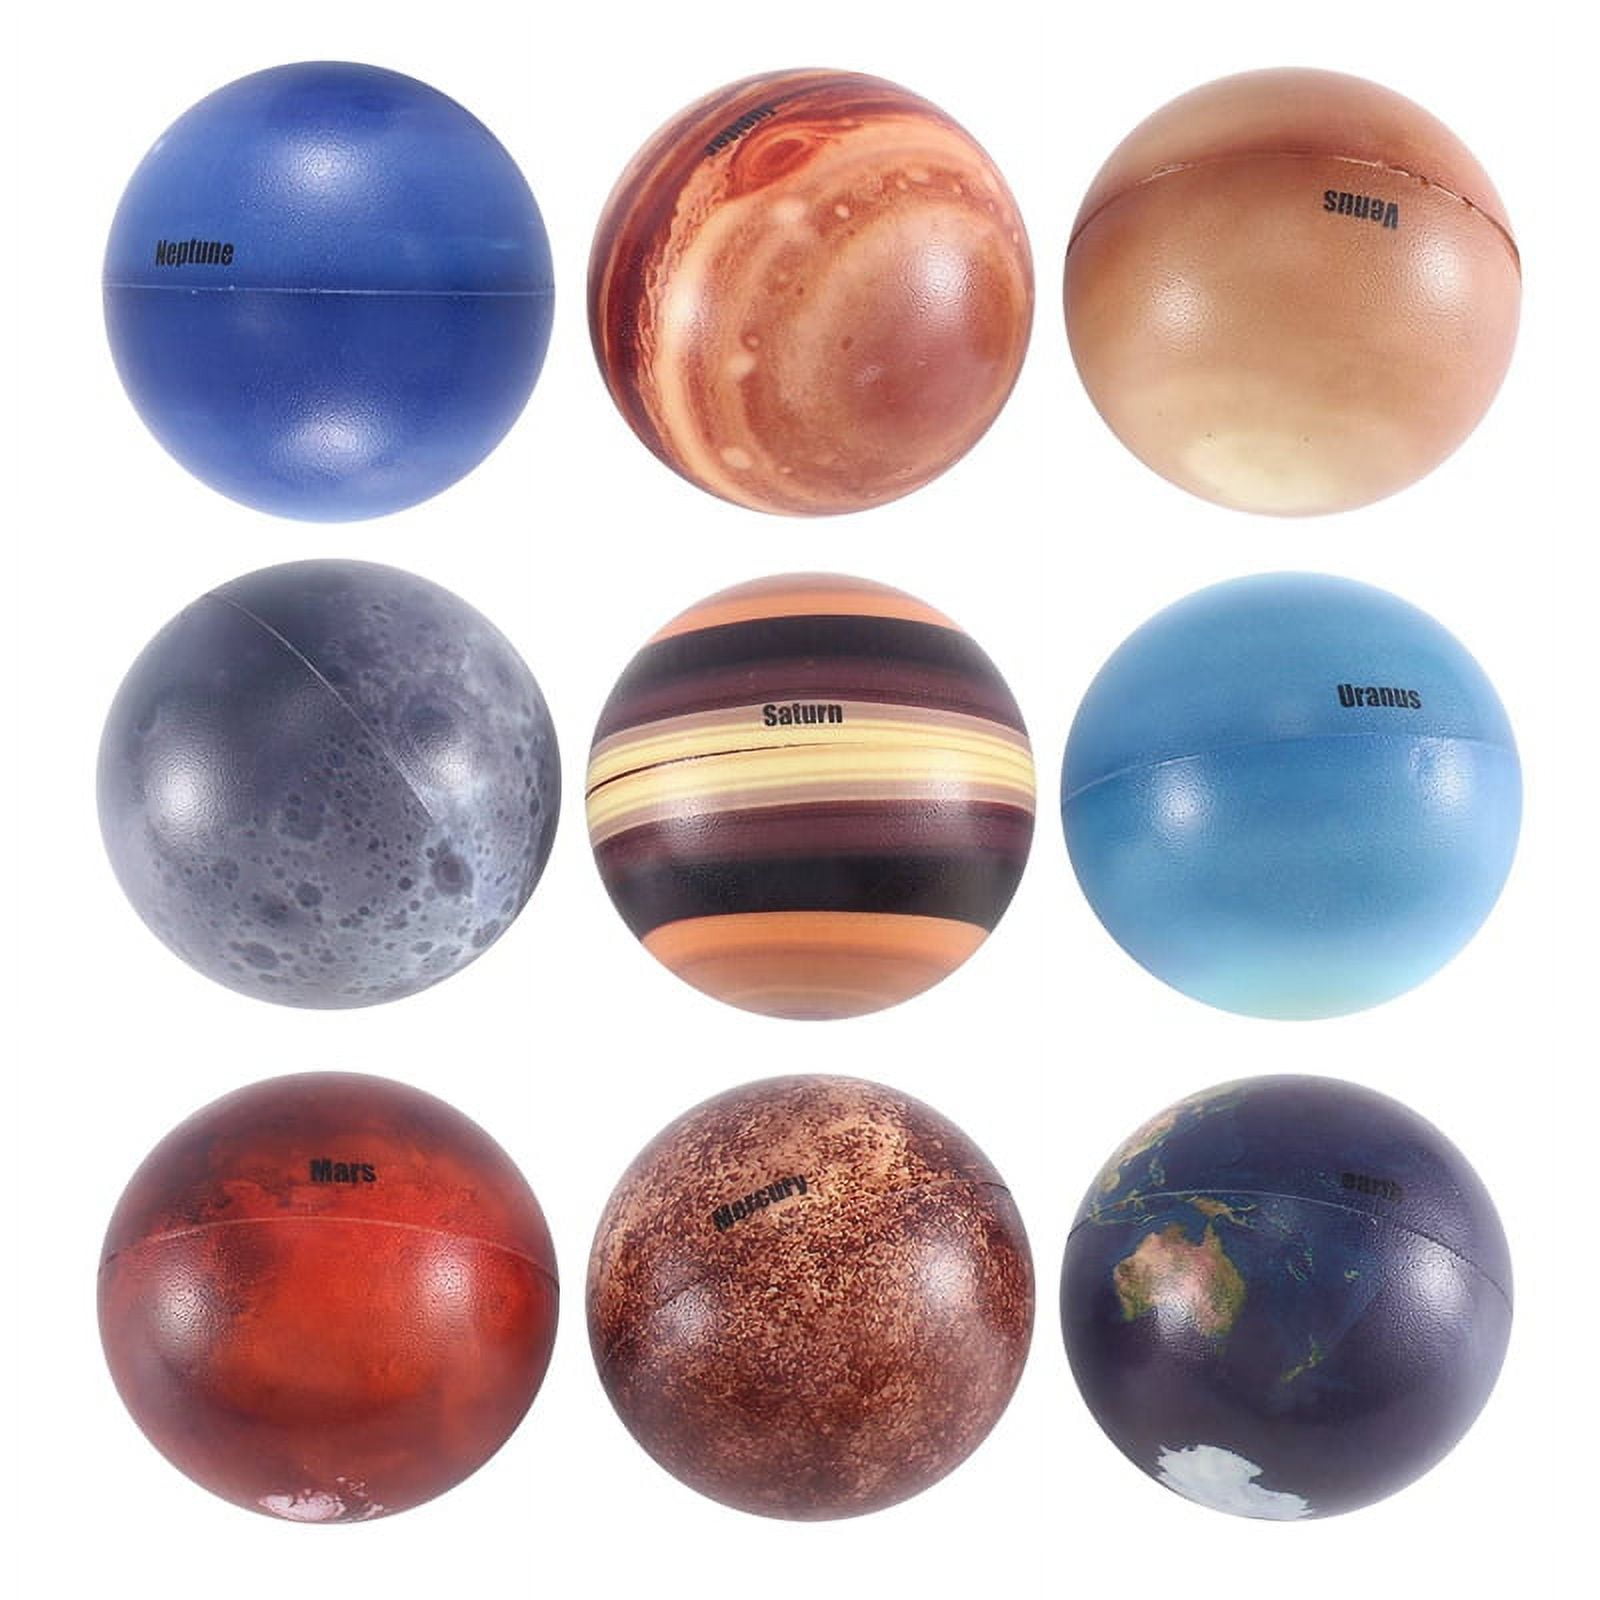 Hemousy Solar System Squeeze Balls Relaxing Planet Toy for Children